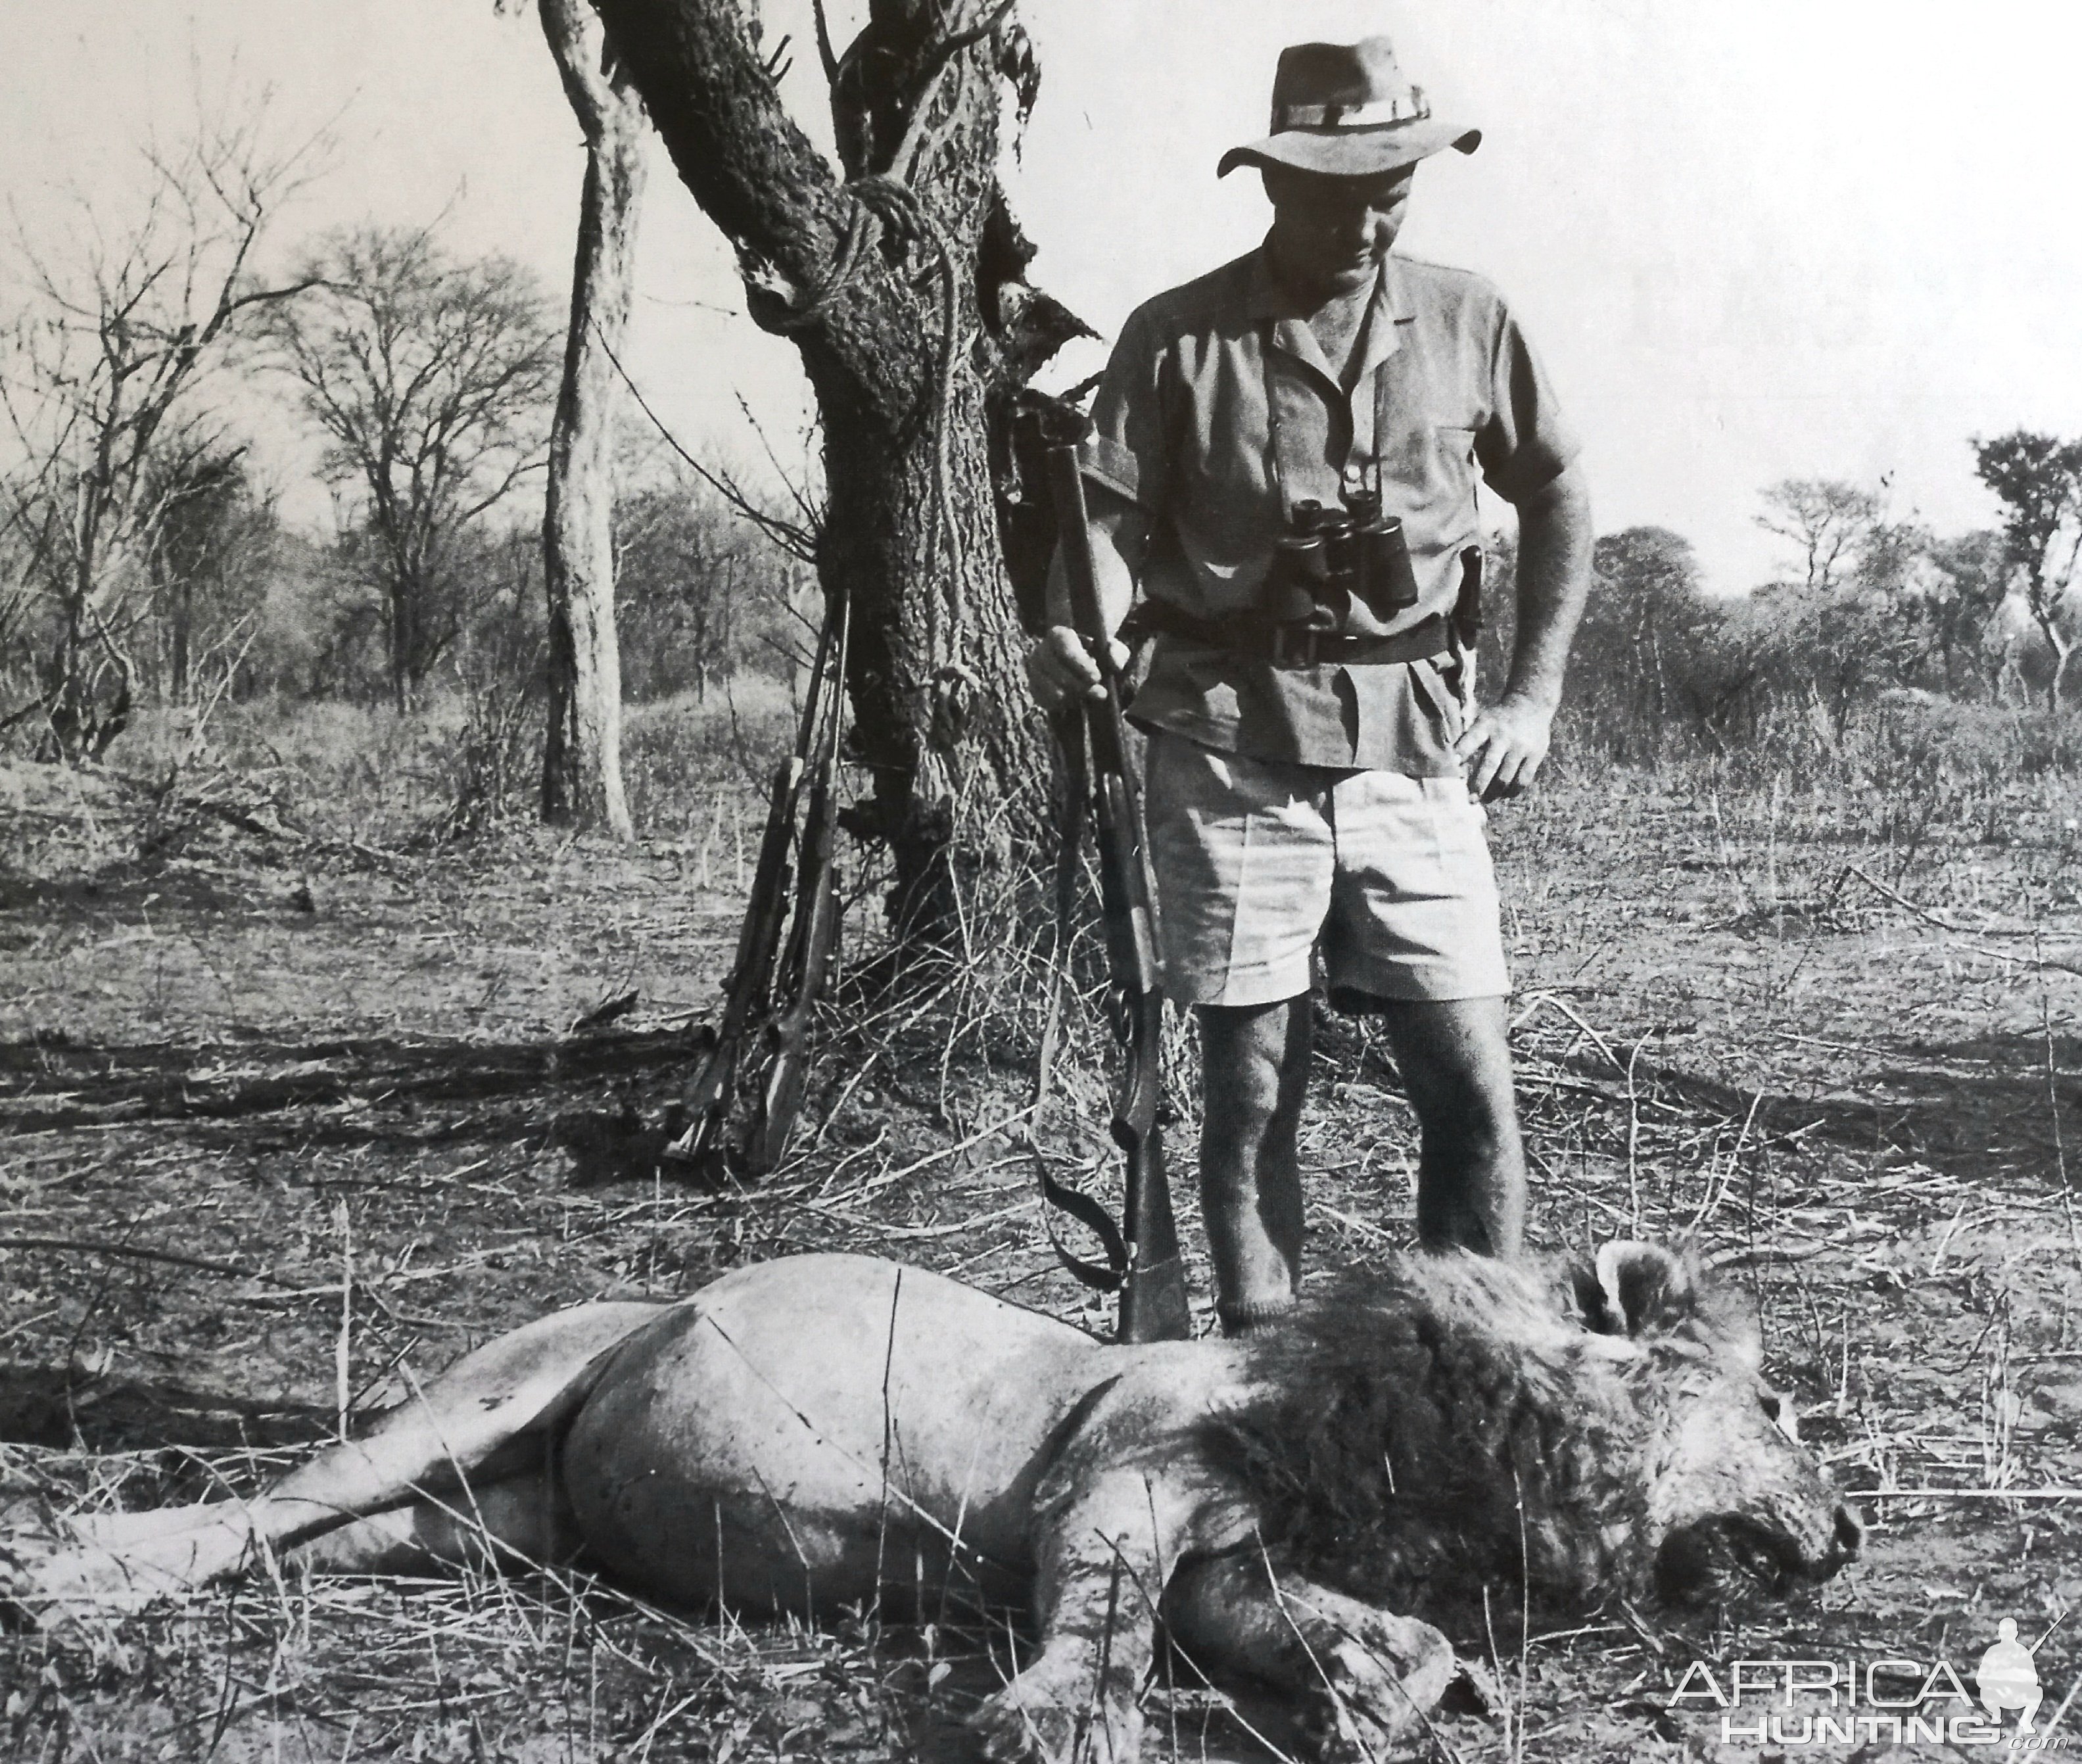 Professional hunter Chris Vivier with a fine lion taken in Zambia in the 1960s.